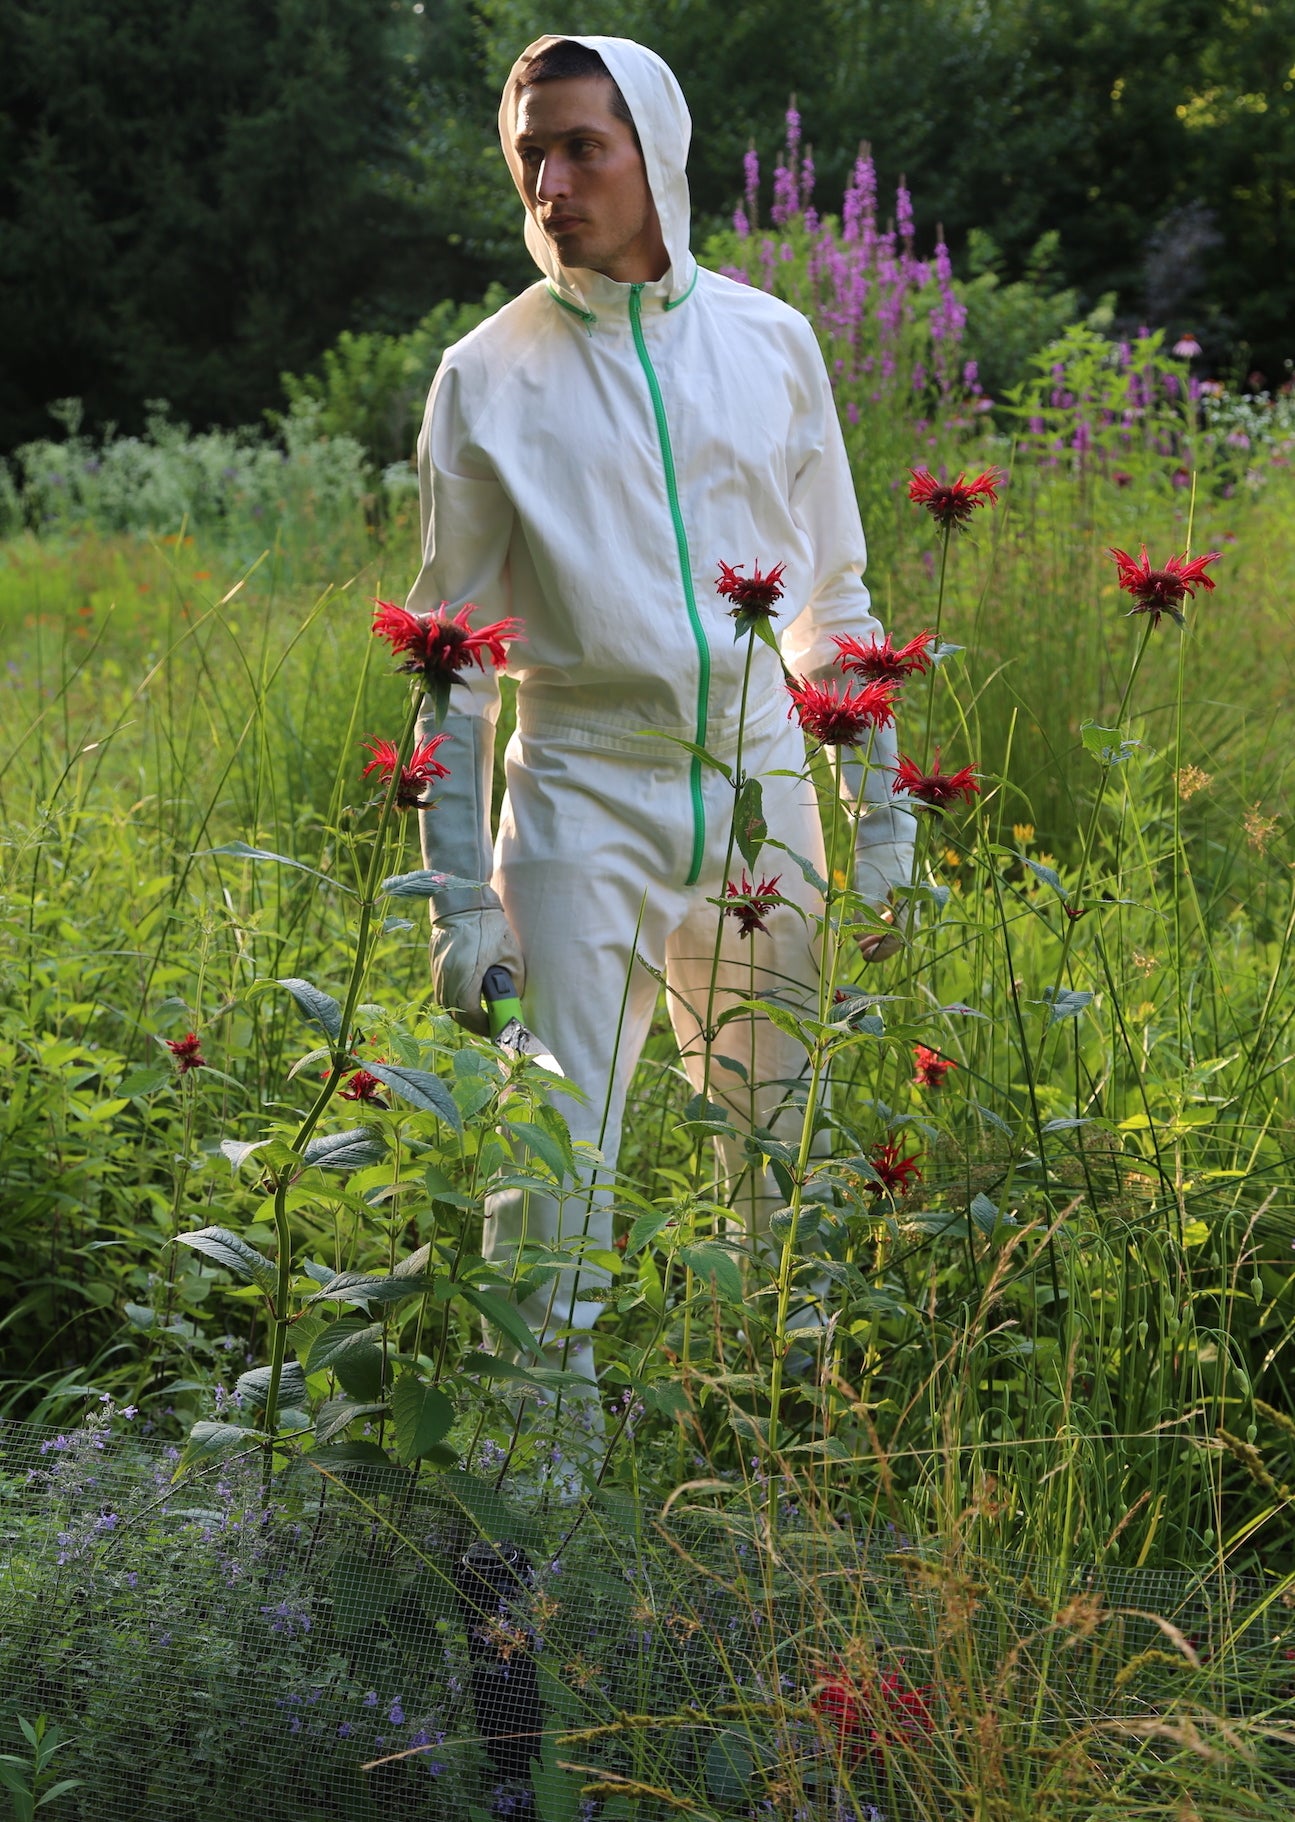 Man standing in tall grass wearing TheTickSuit holding a pair of gardening scissors.